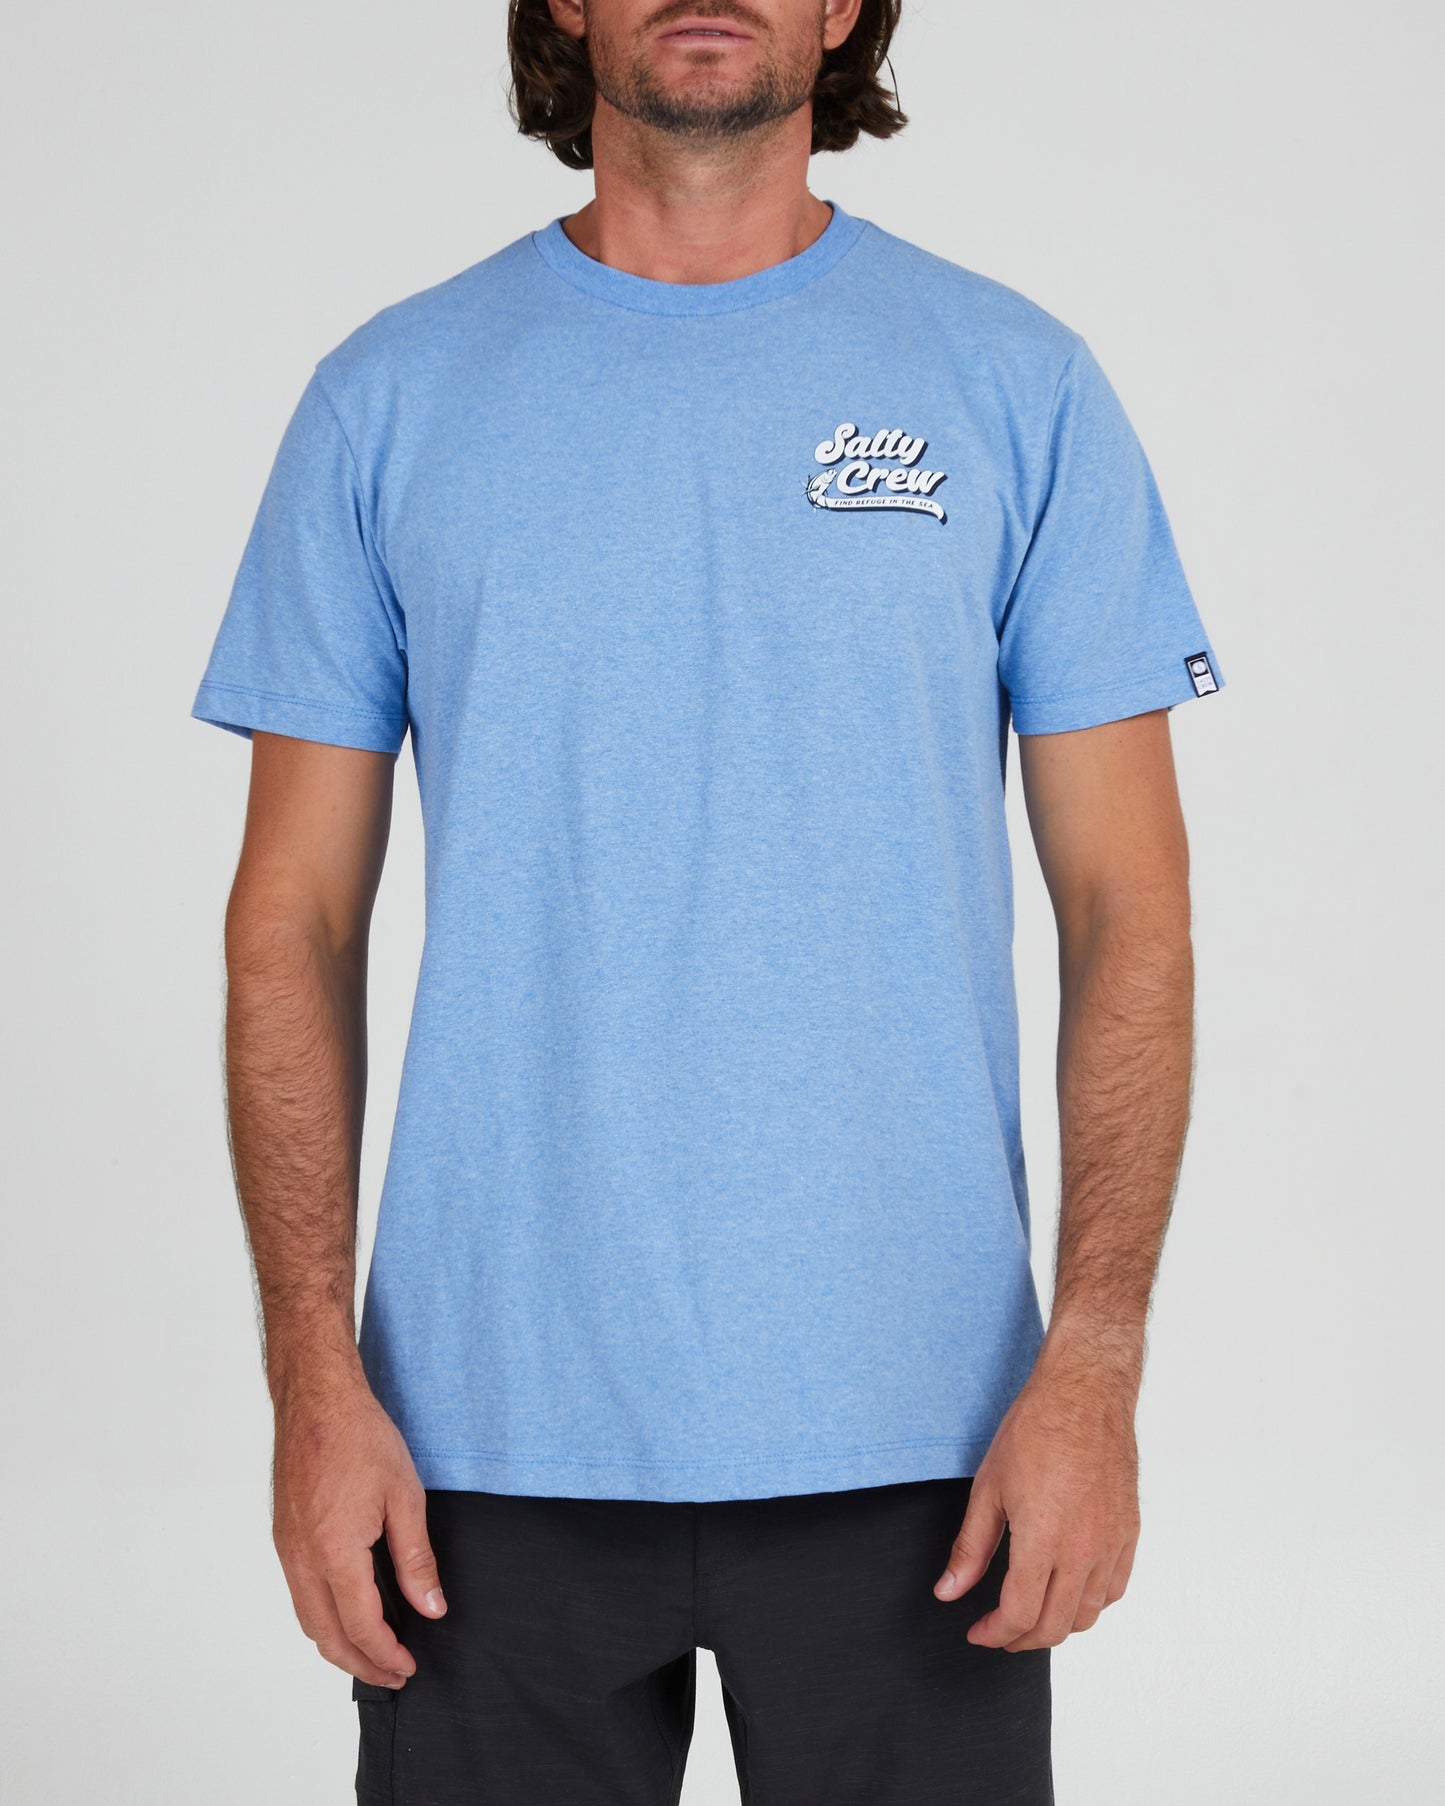 On body front of the Swift Water Light Blue Heather S/S Standard Tee